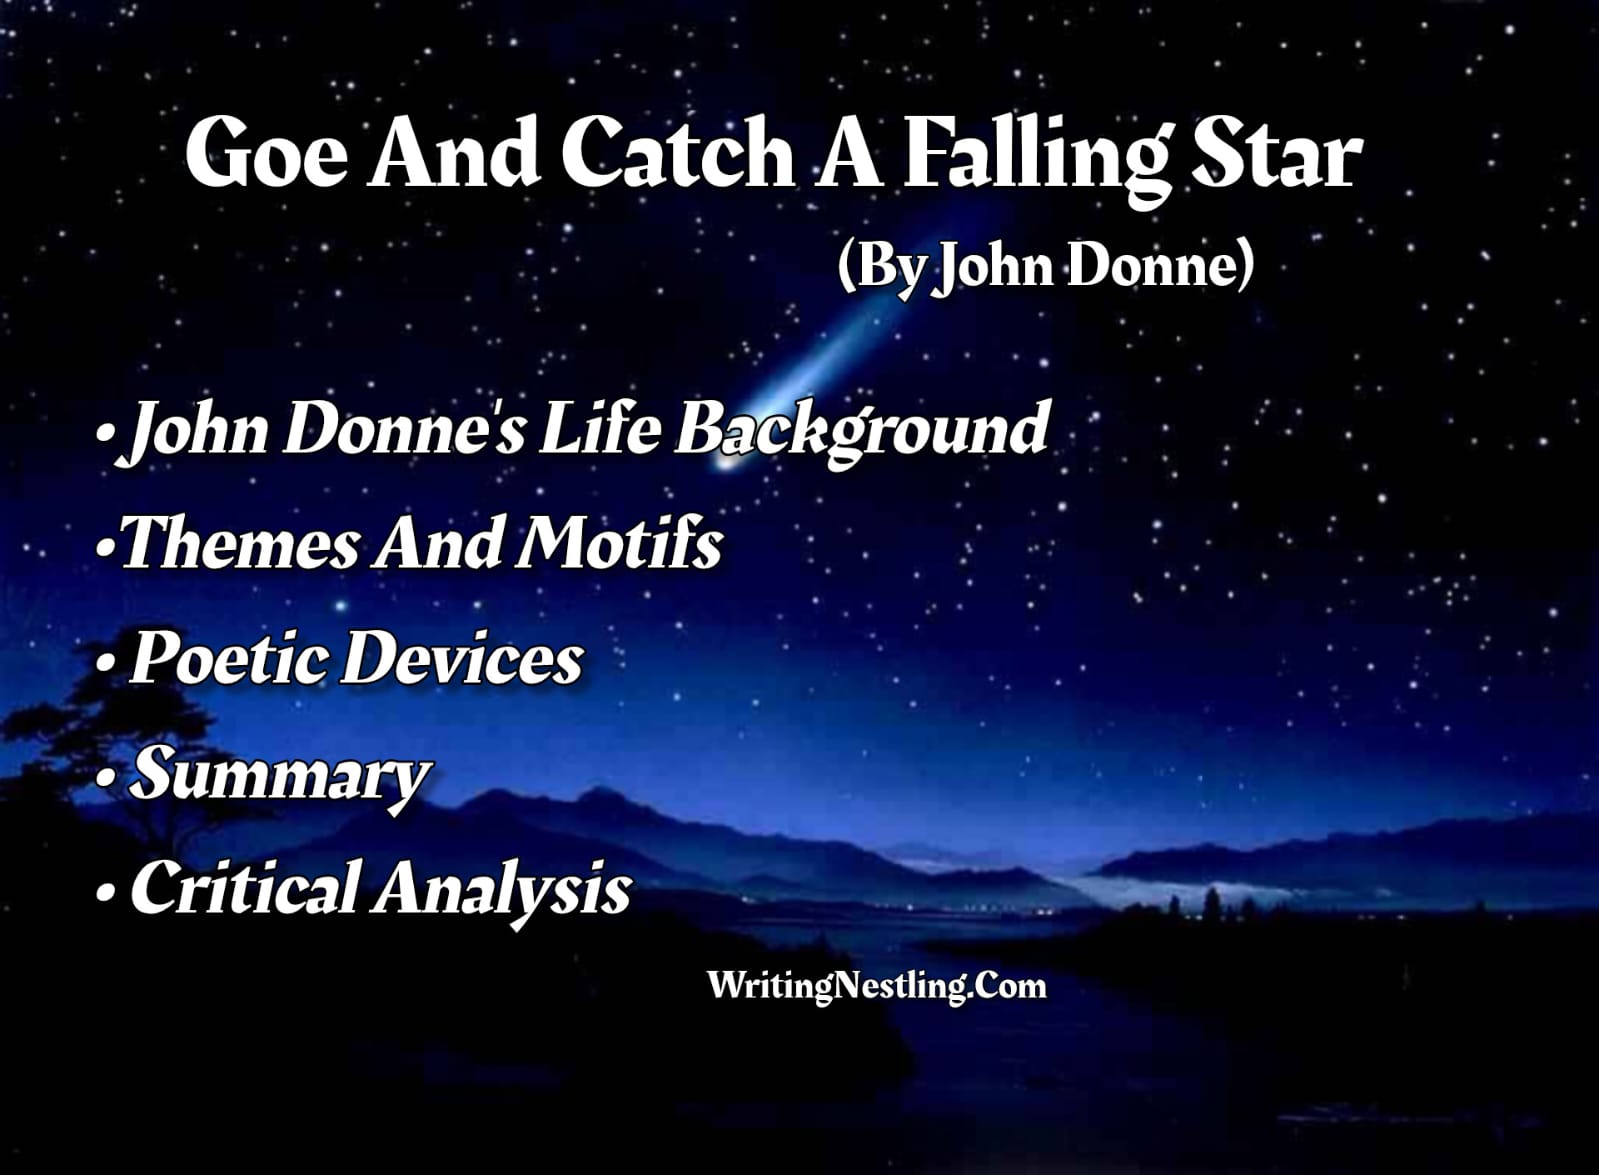 Goe And Catch A Falling Star